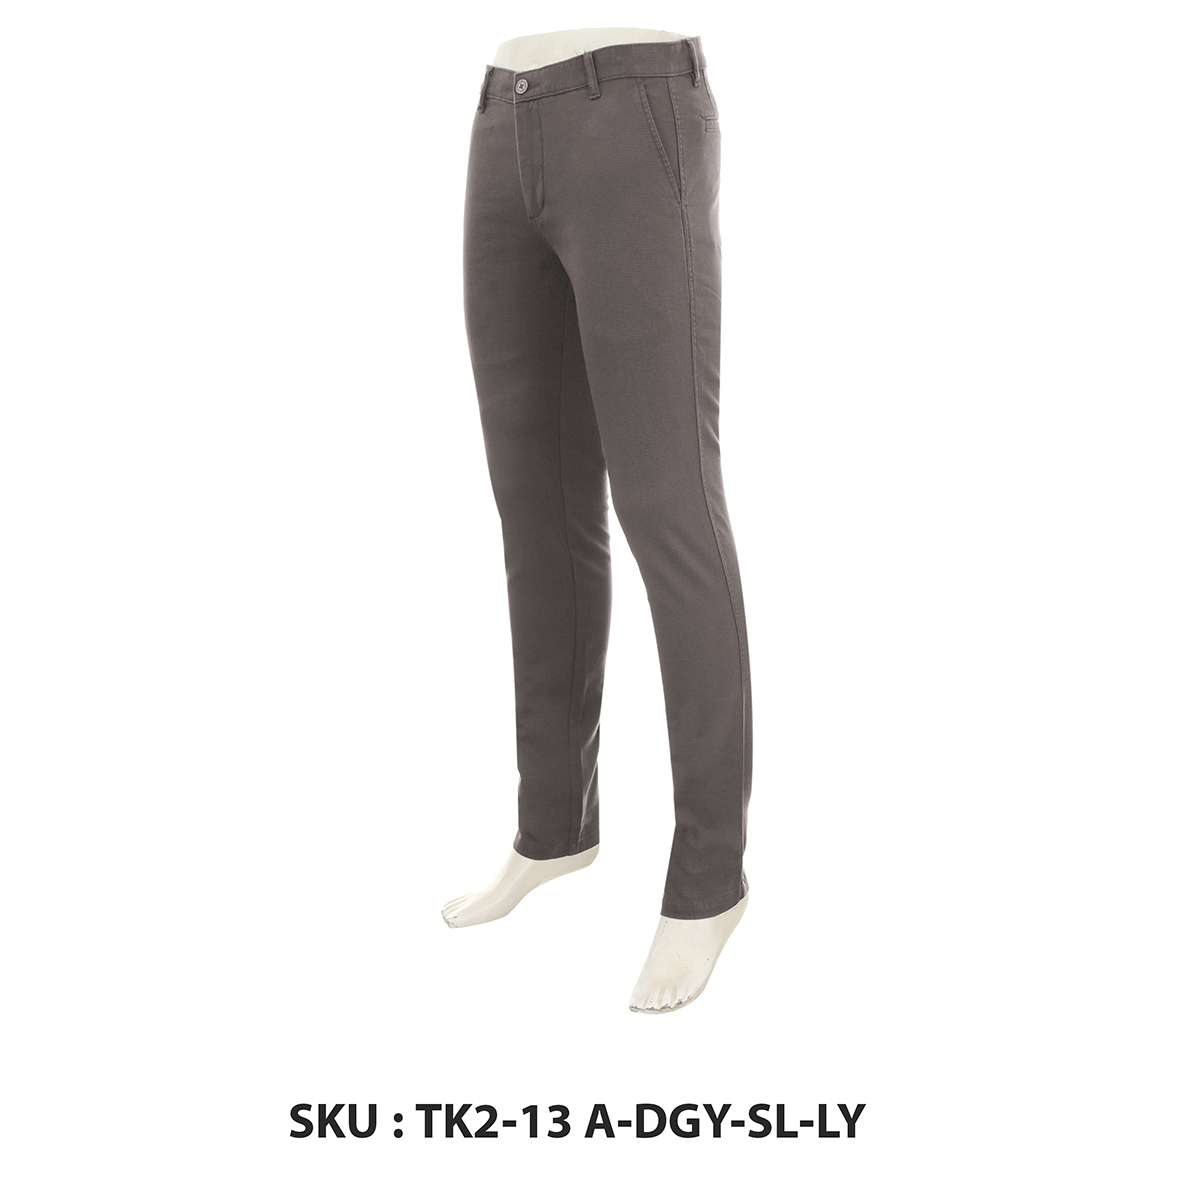 Classic Polo Mens Trousers Tk2-13 A-Dgy-Sl-Ly Grey 28